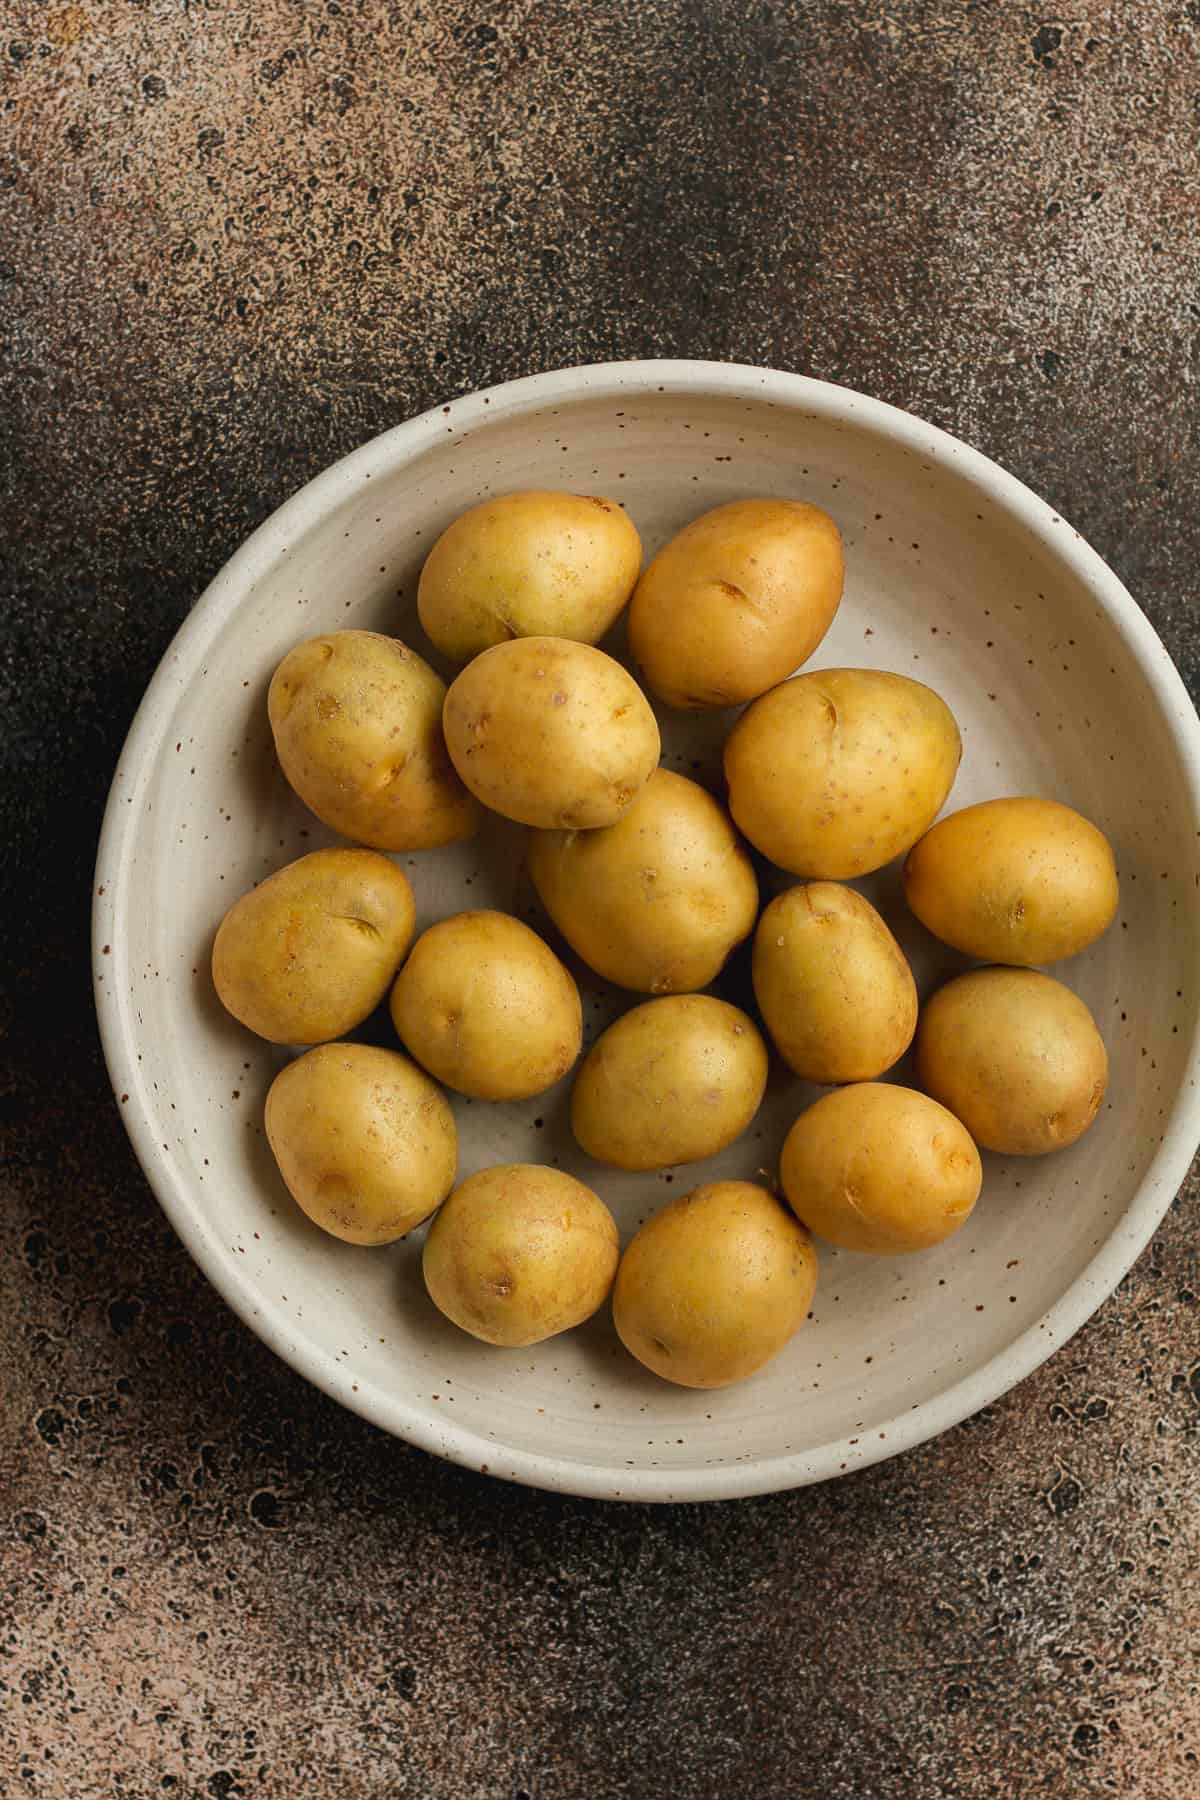 A bowl of yellow baby potatoes.